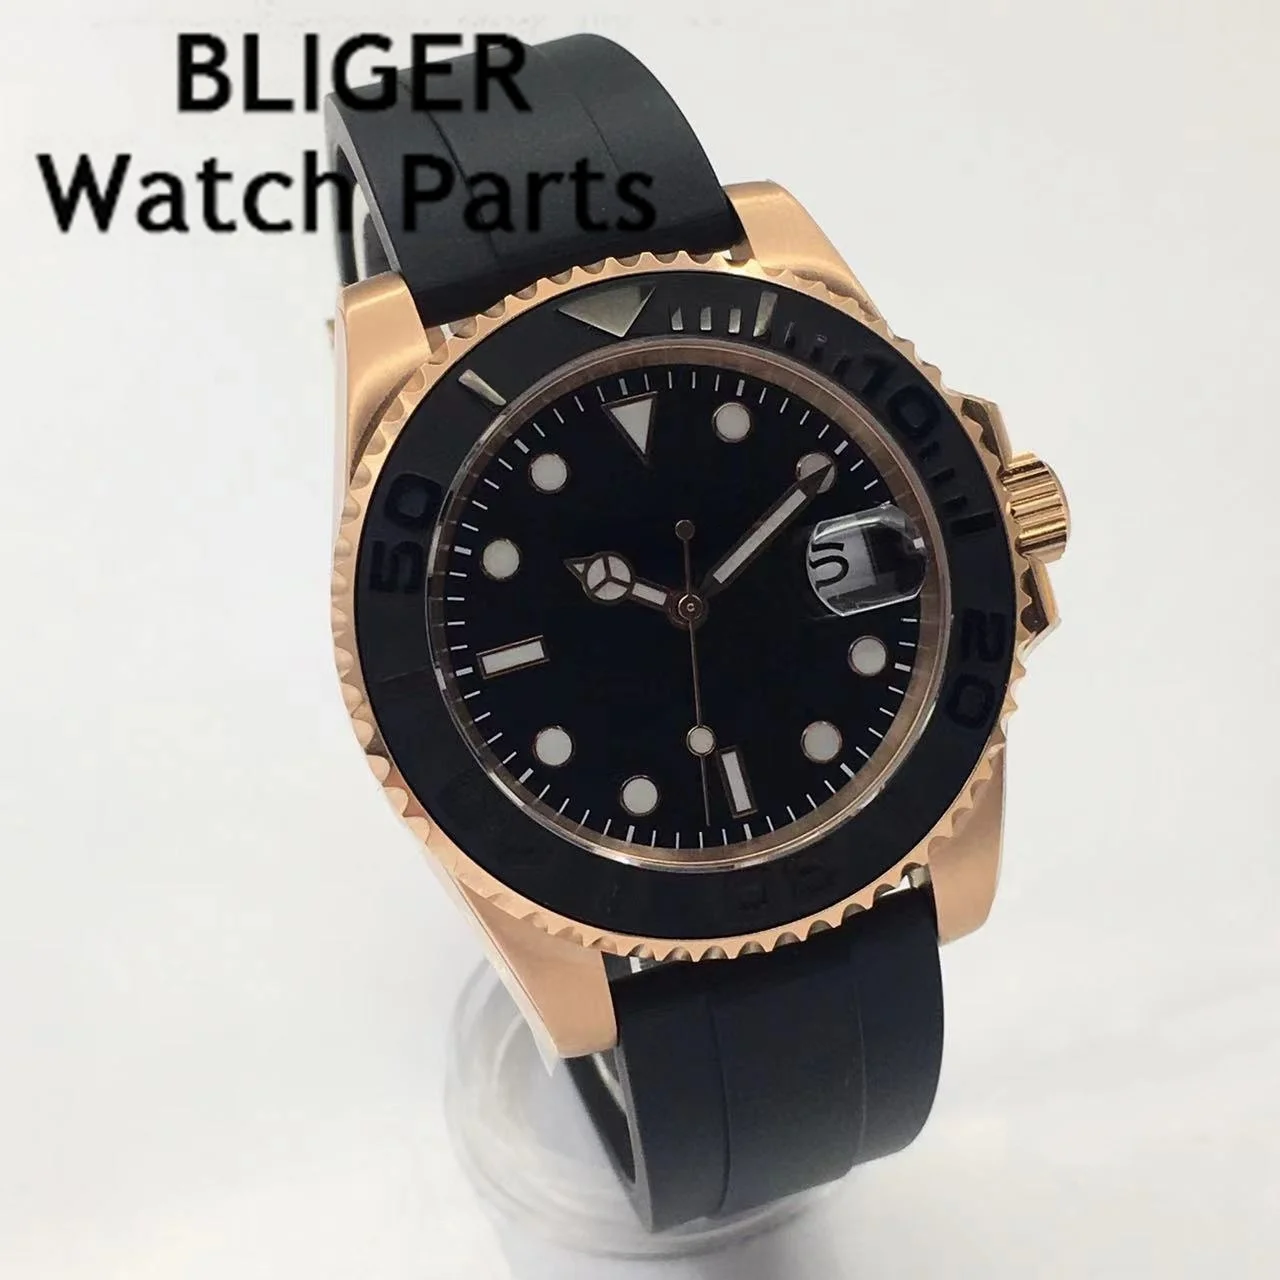 BLIGER 40mm NH35A MIYOTA 8215 PT5000 Automatic Mens Watch Sapphire Glass Curved Rubber Strap Luminous Black Dial tuedix brand dive waterproof 41mm sport nh35a sub automatic men watch sapphire glass curved end rubber band relogio masculino